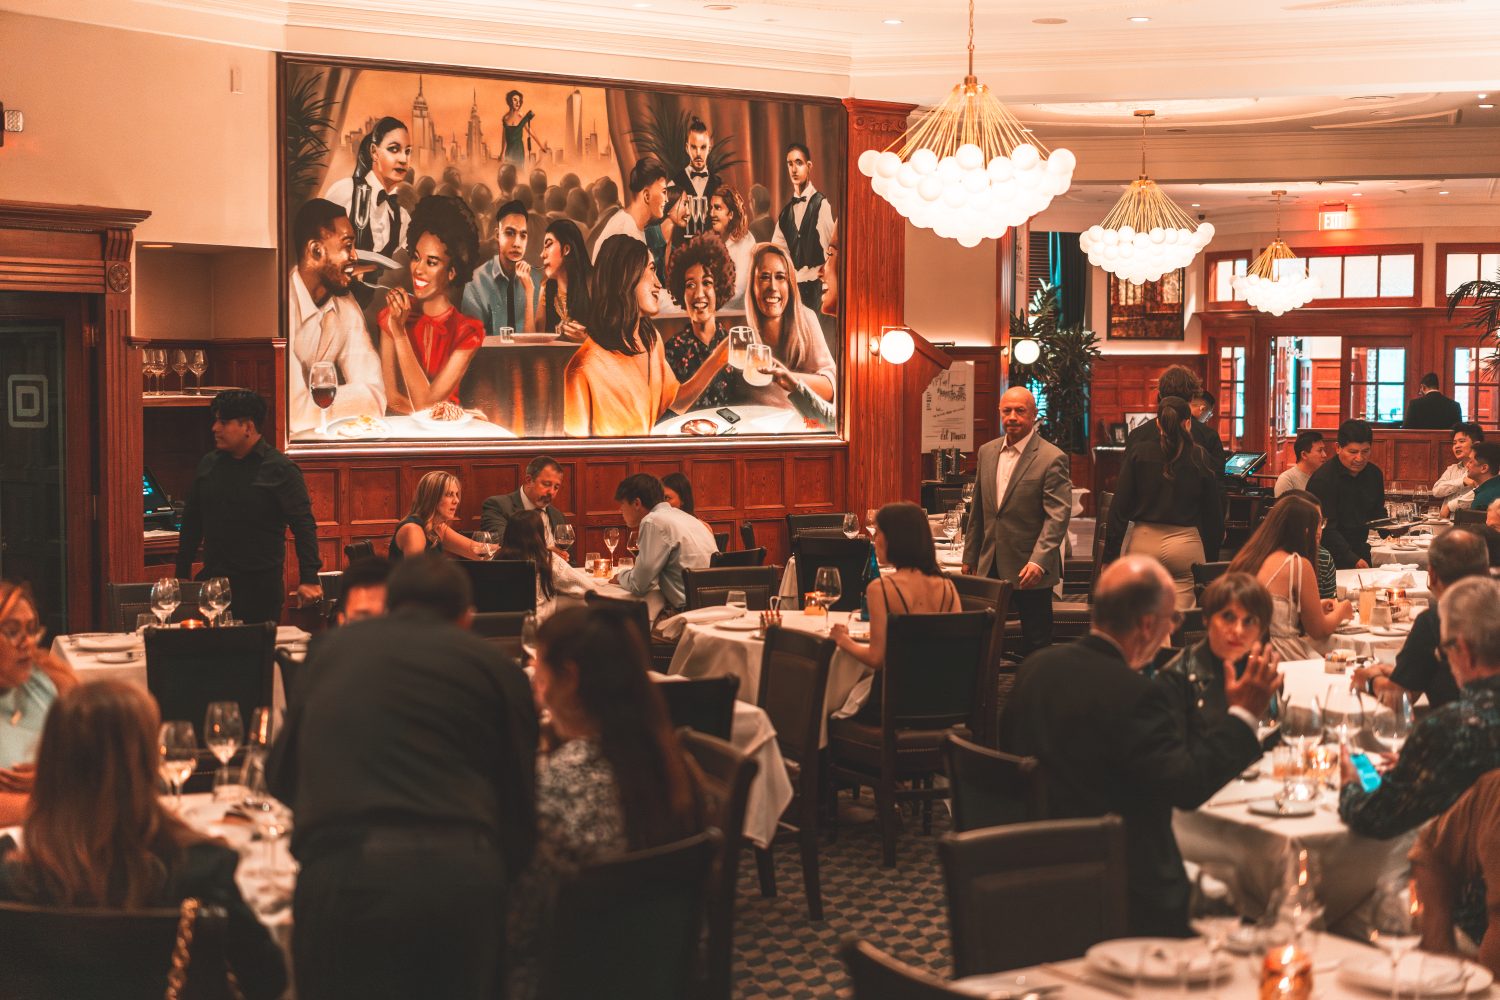 people having dinner, chandeliers, painting on a wall